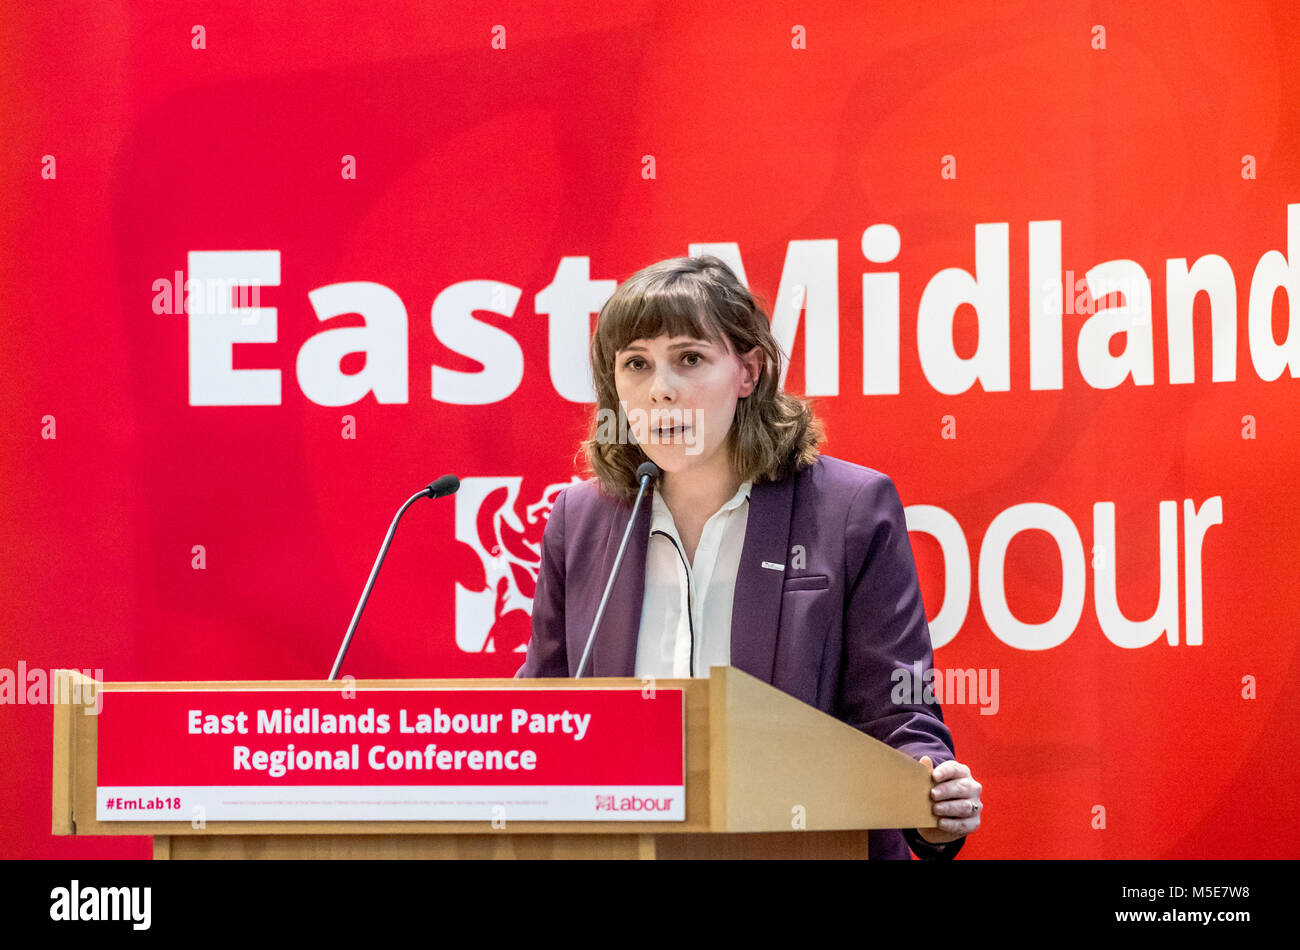 Emma Foody, Regional Director speaking at the East Midlands Labour Party 2018 conference in Loughborough, UK. Stock Photo